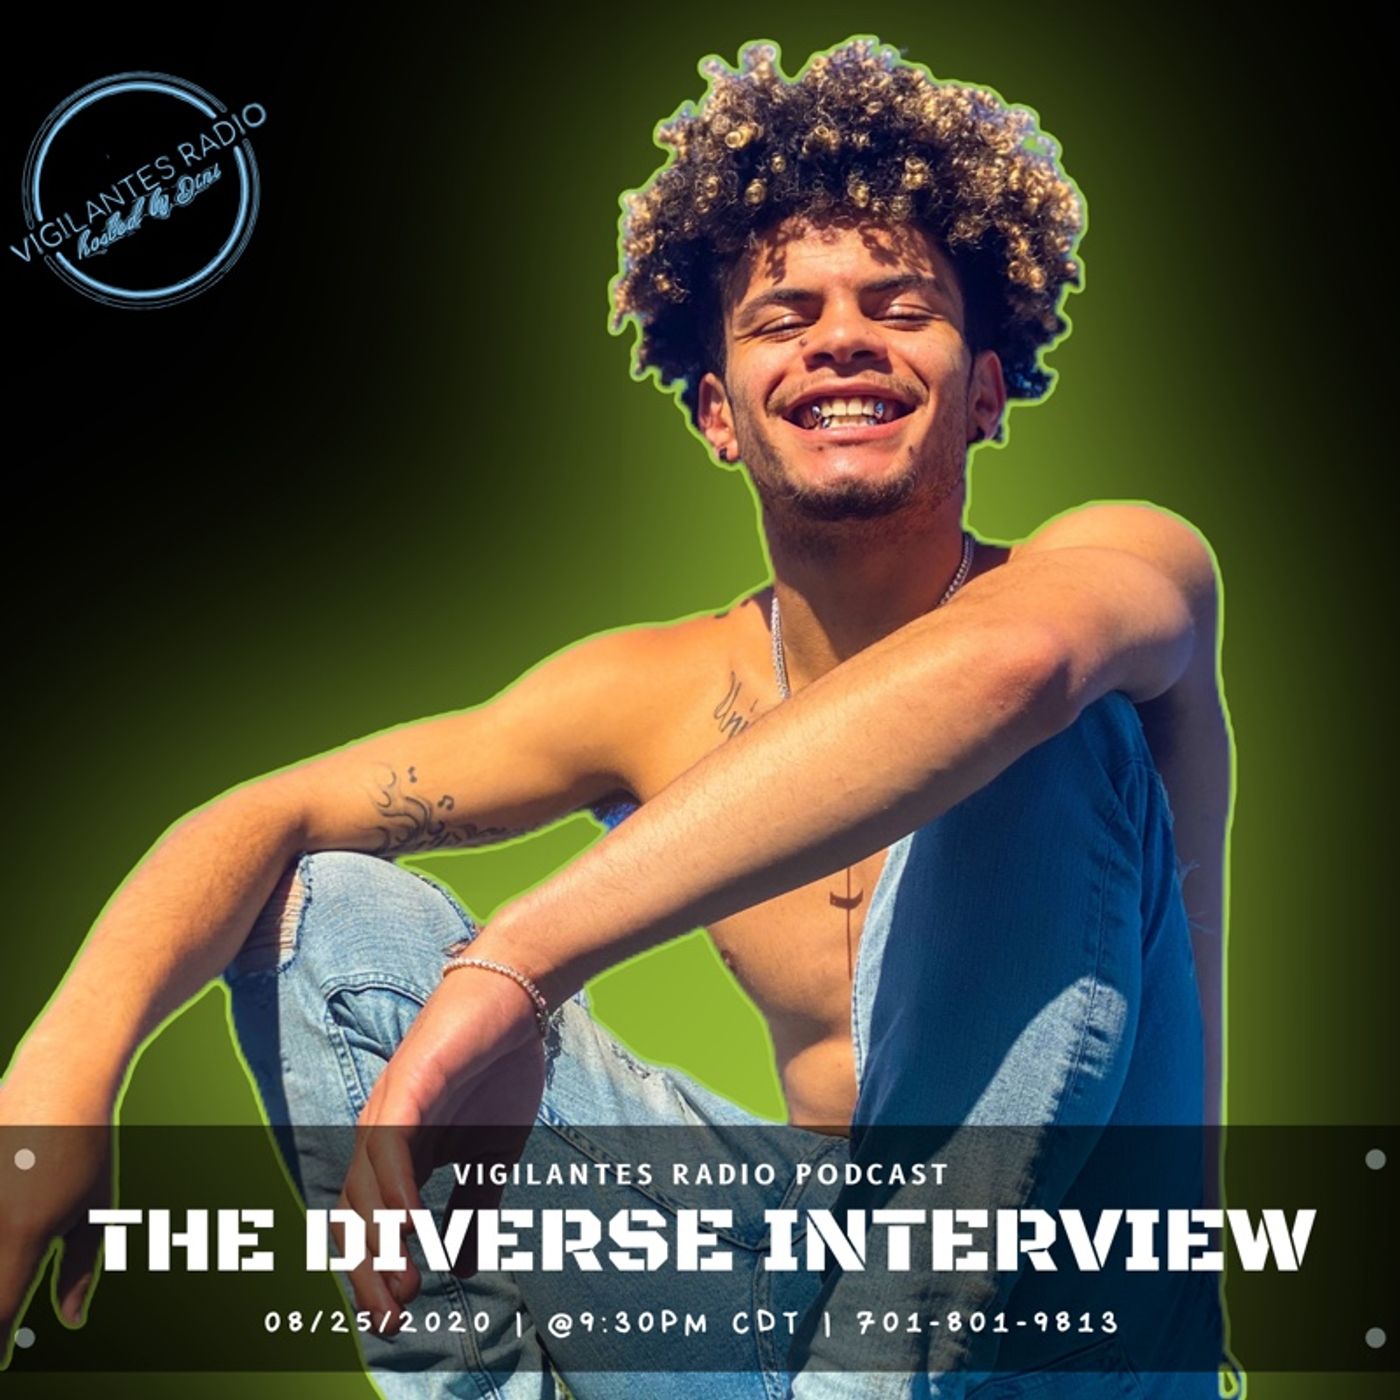 The Diverse Interview. Image